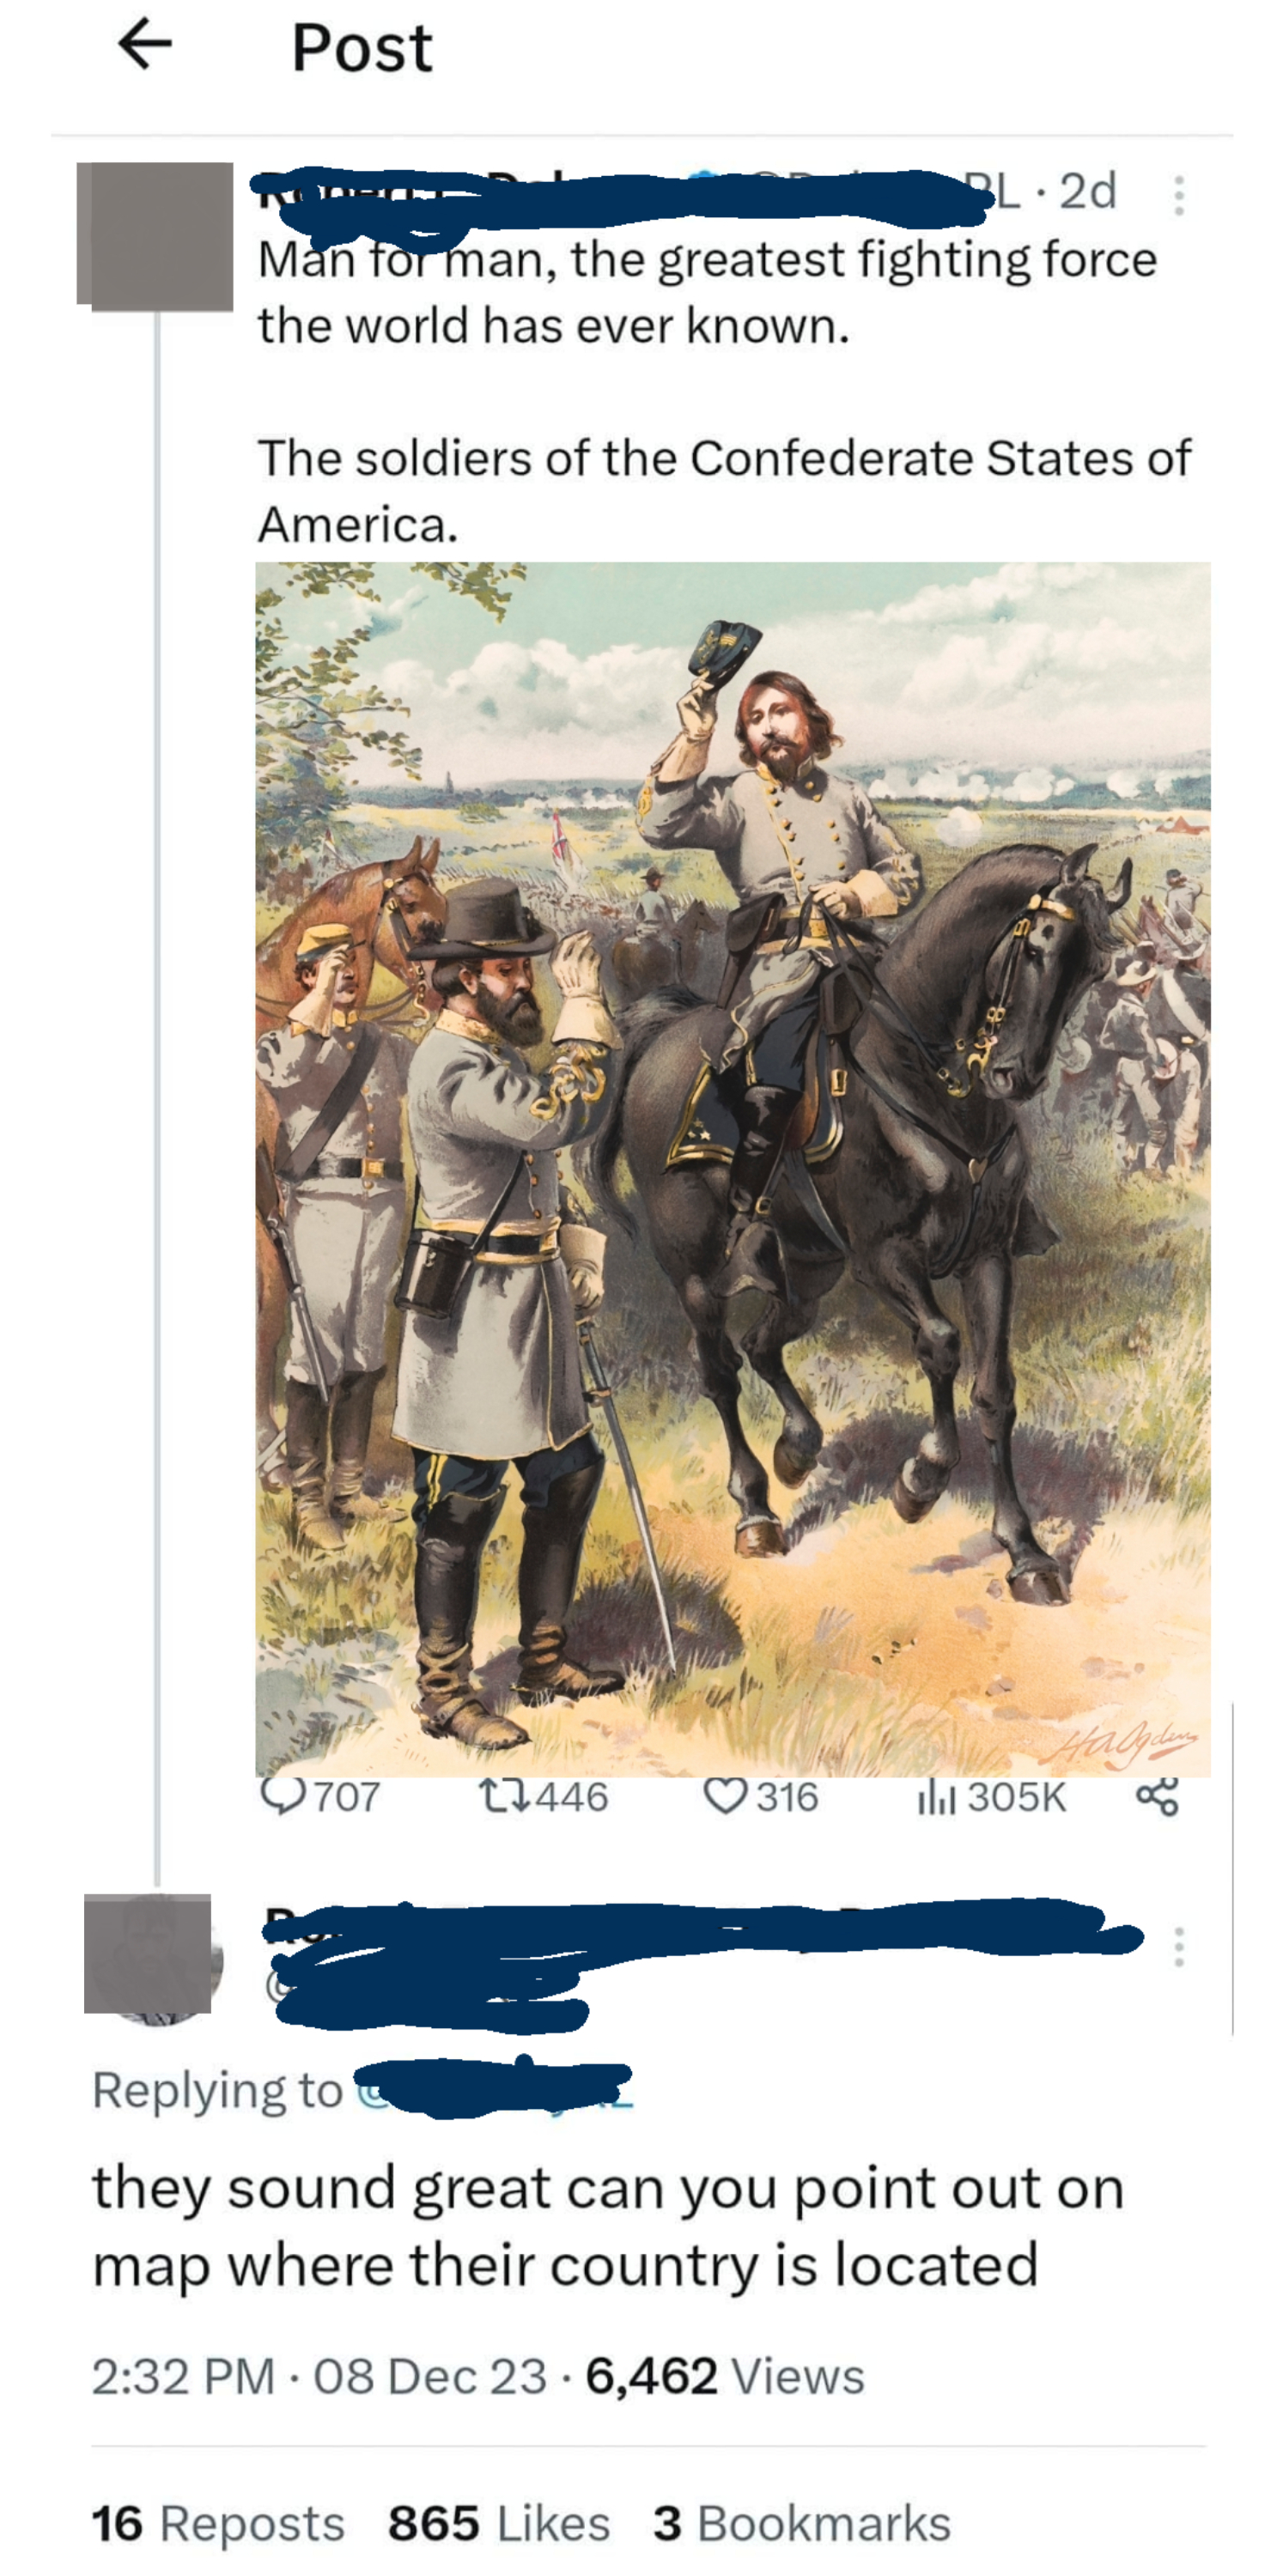 &quot;Man for man, the greatest fighting force the world has ever known: the soldiers of the Confederate States of America&quot; and &quot;They sound great can you point out on map where their country is located&quot;